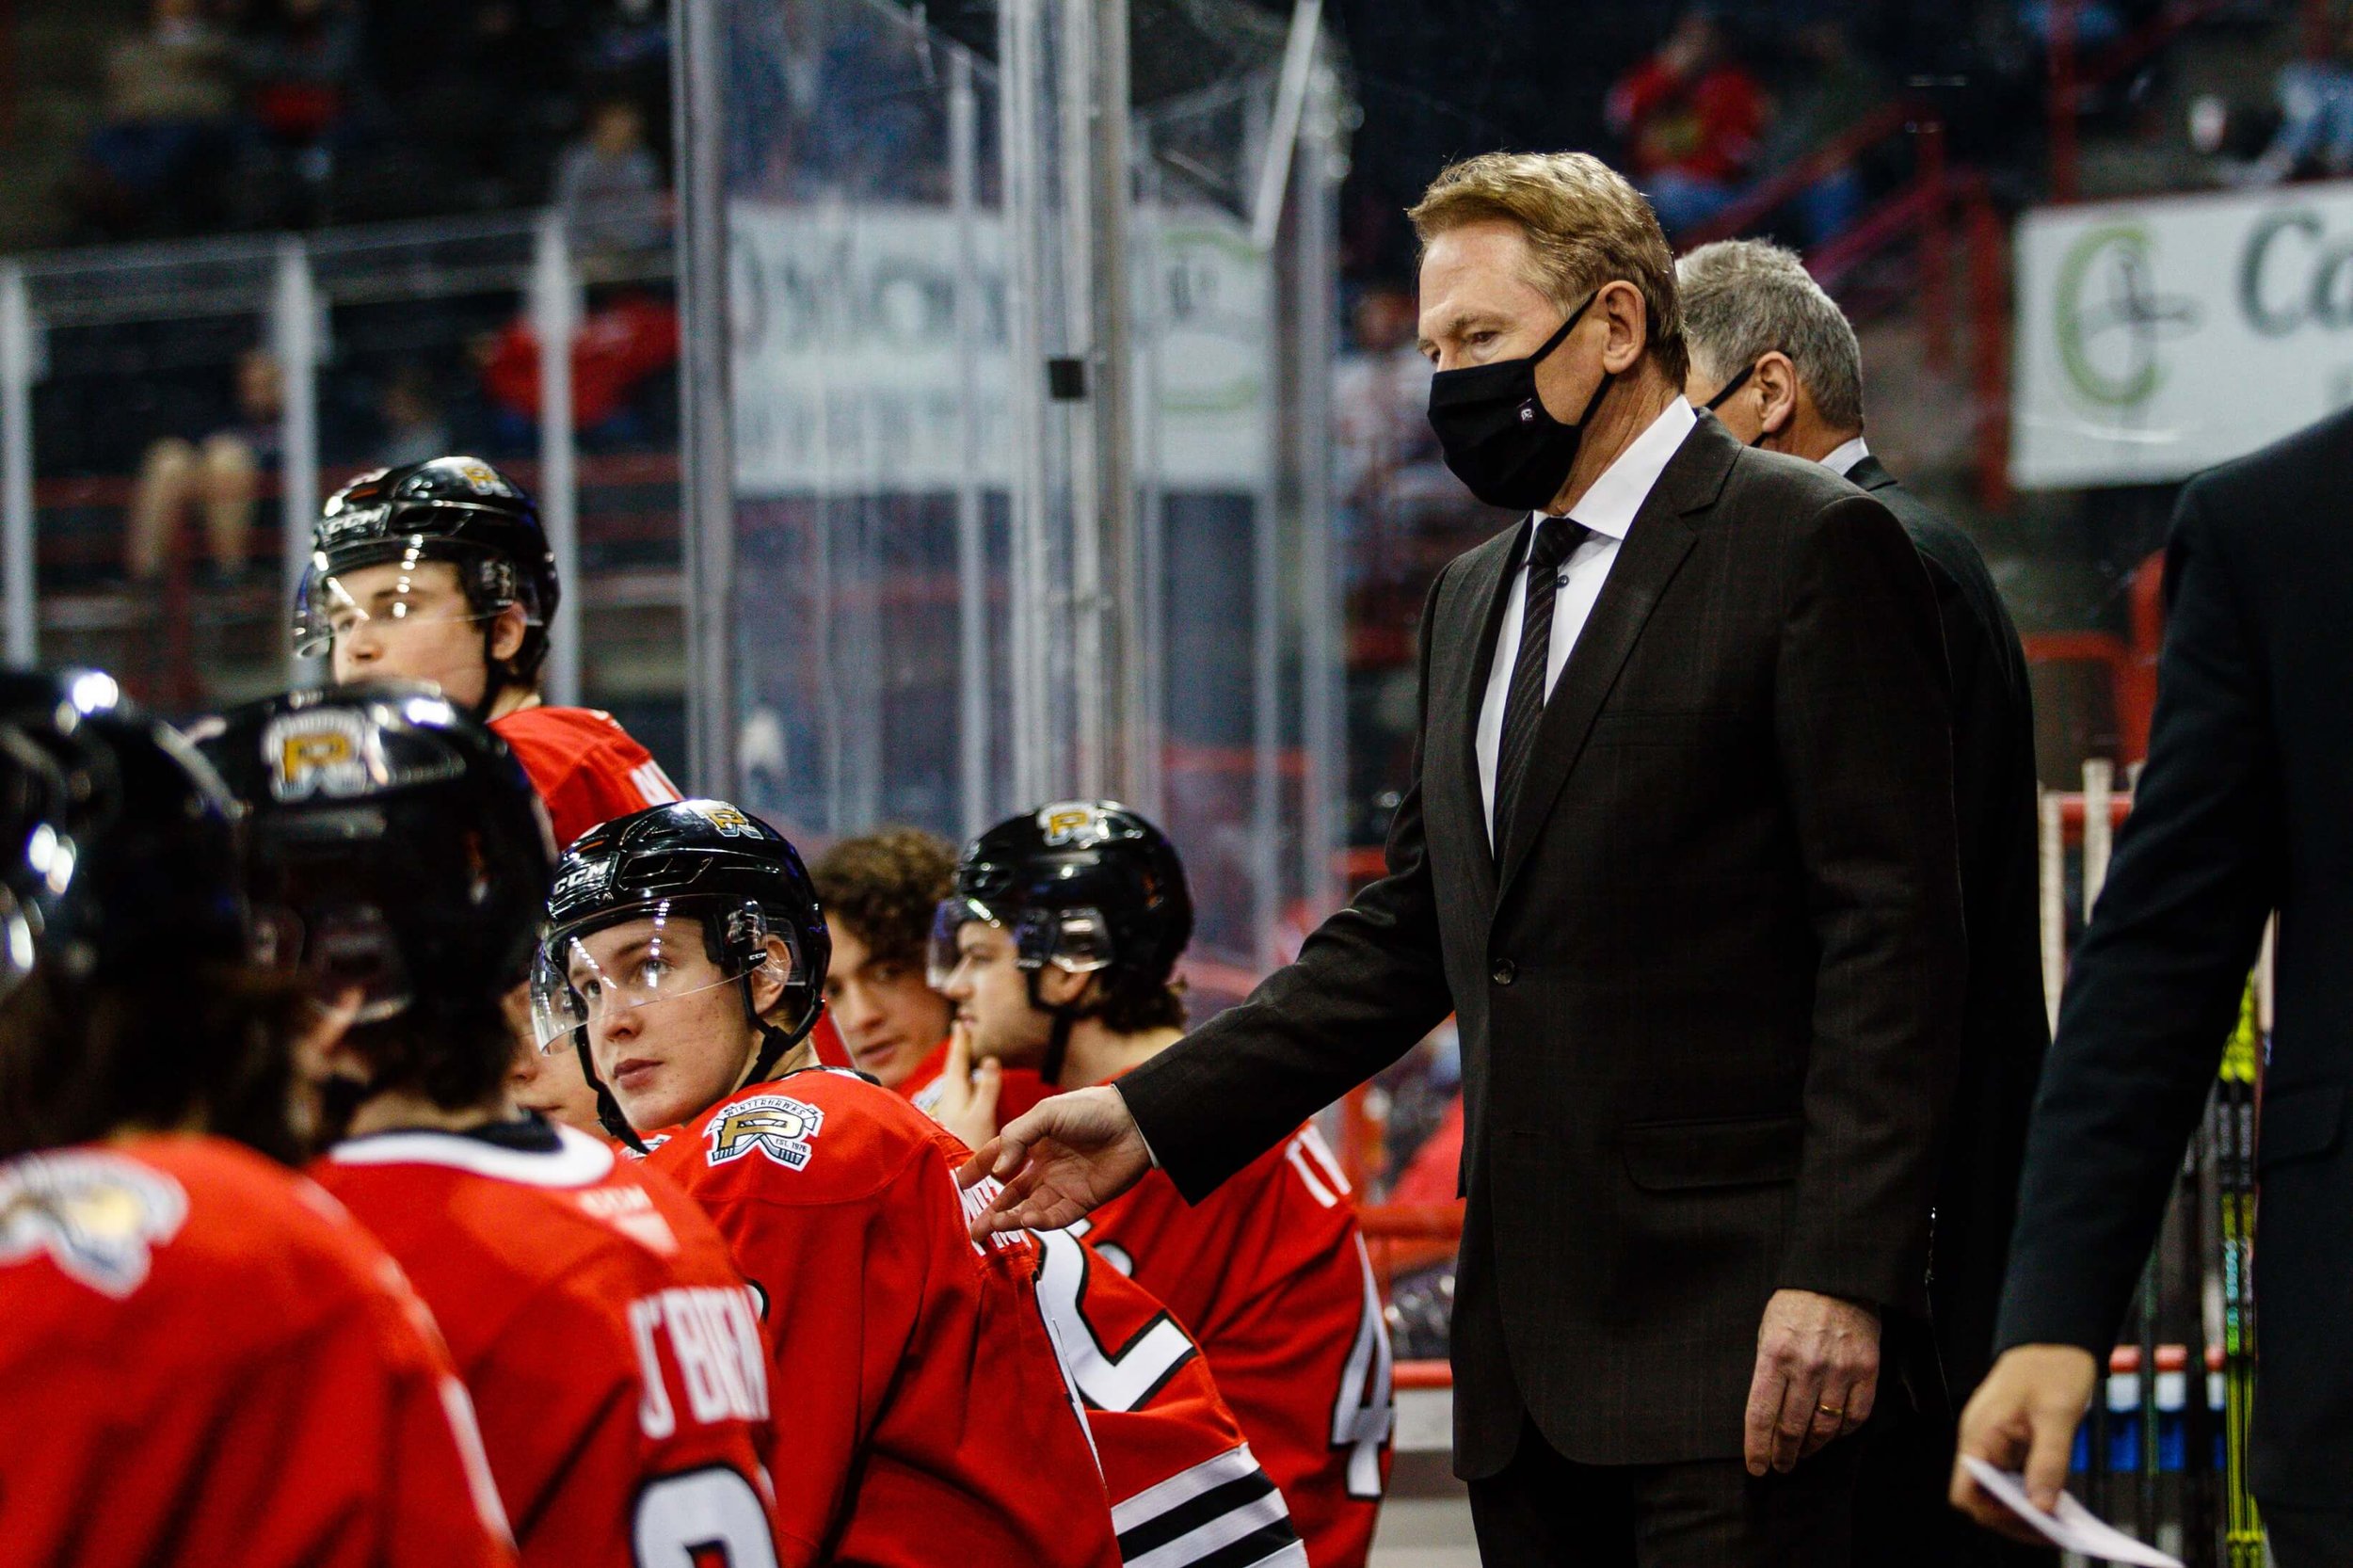 Portland Winterhawks lead the way in a look at the WHL's contenders